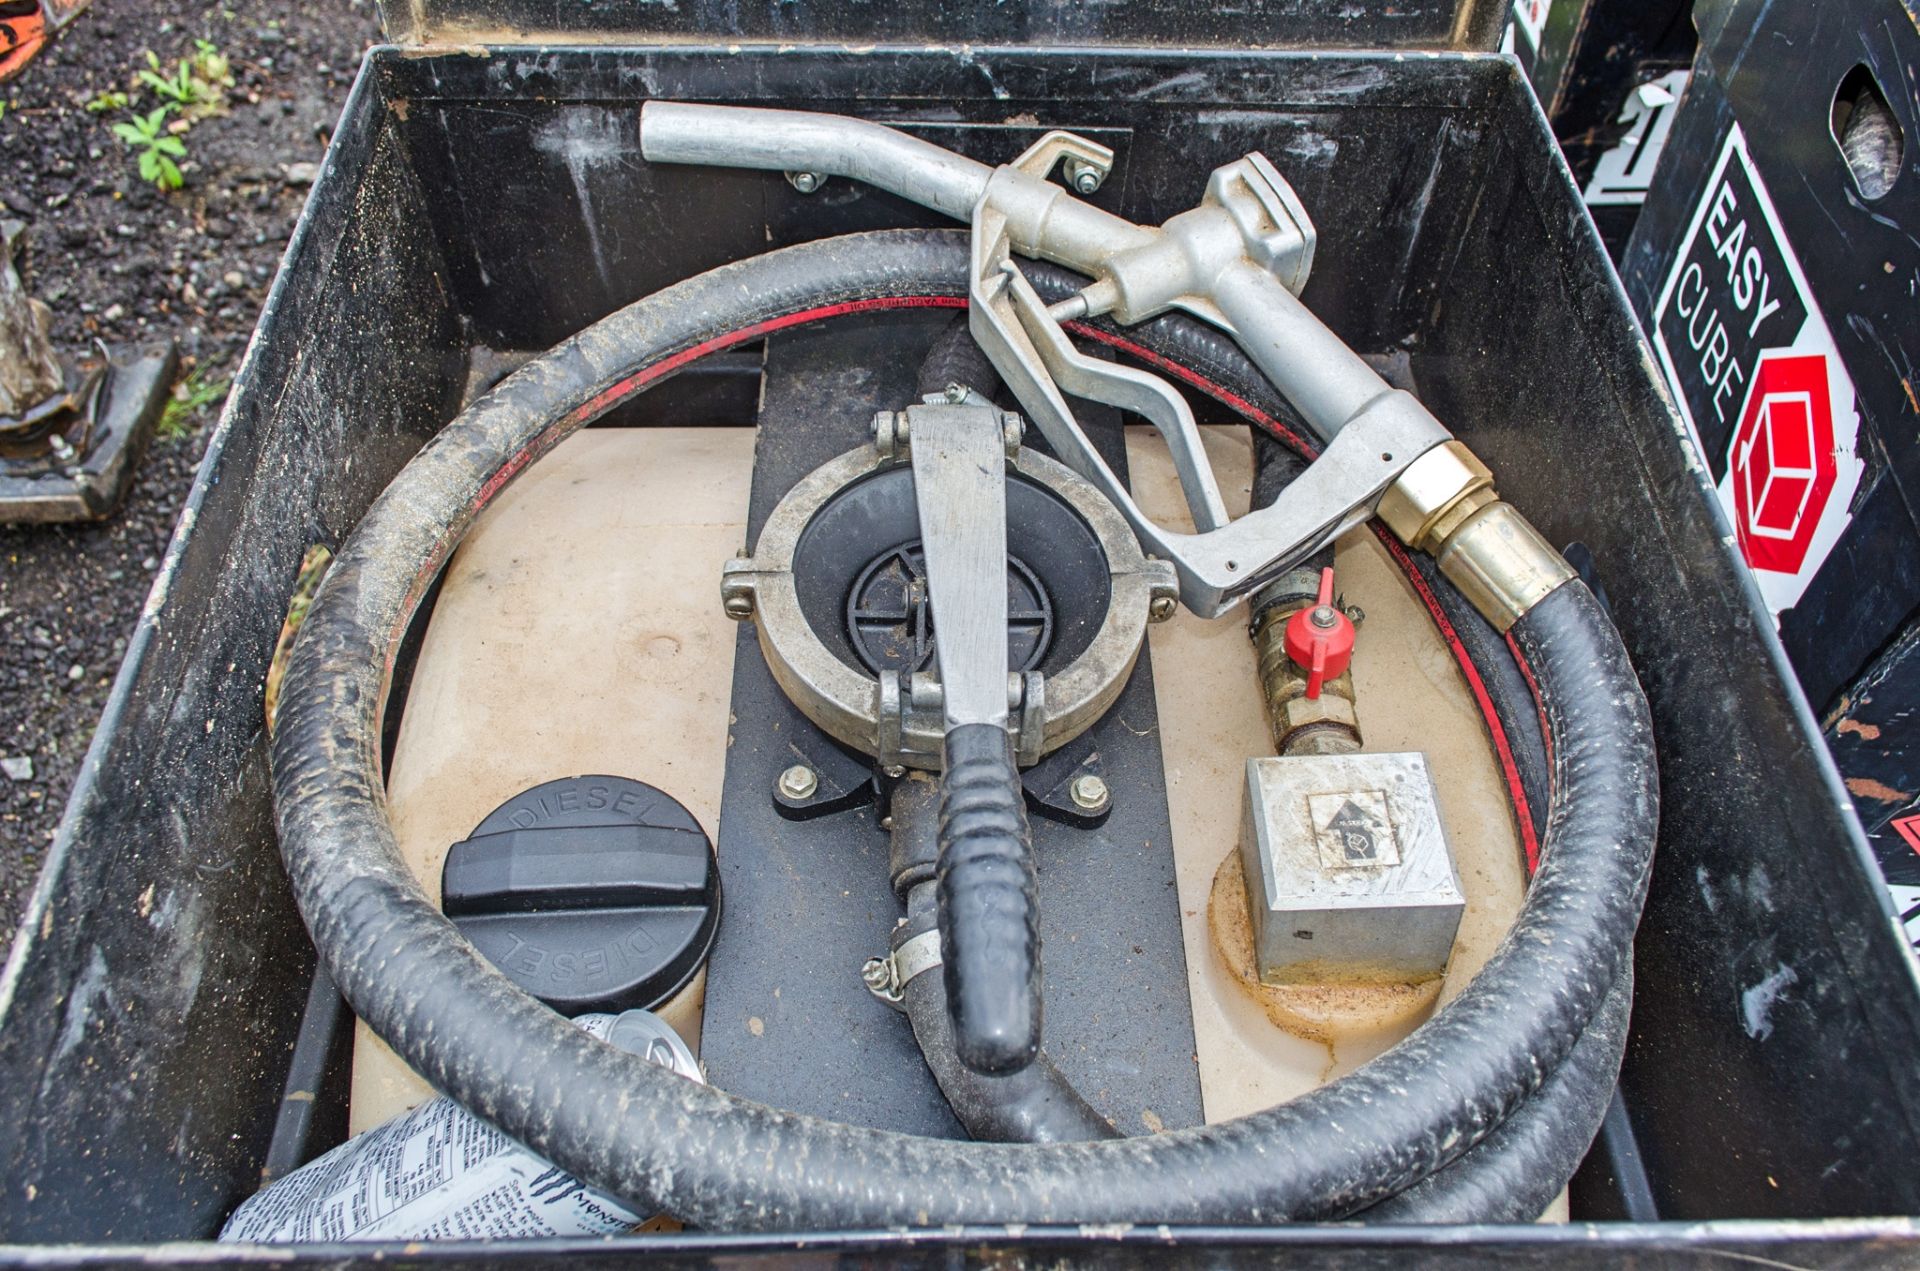 Western Easy Cube 105 litre bunded fuel bowser c/w manual pump, delivery hose and nozzle 221B0094 - Image 3 of 3